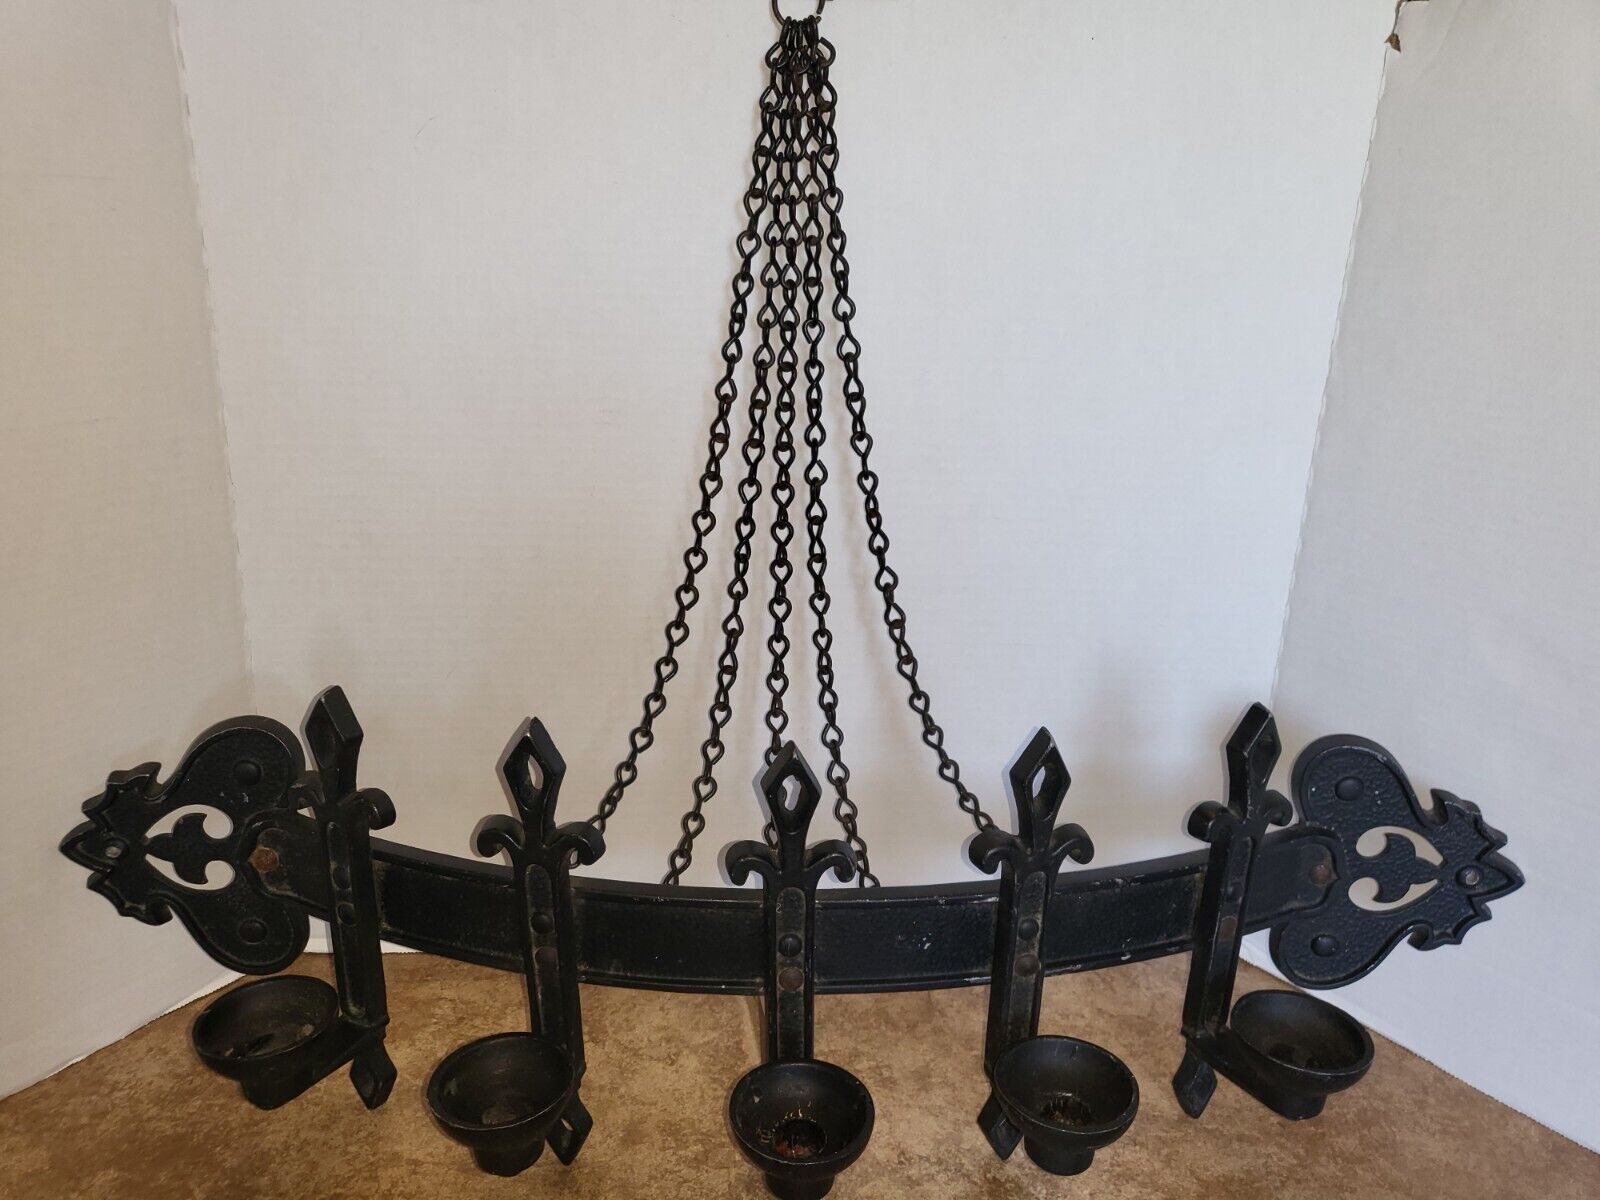 Vintage Gothic Medieval Large Black Metal Wall Sconce With Chains Candle Holder 